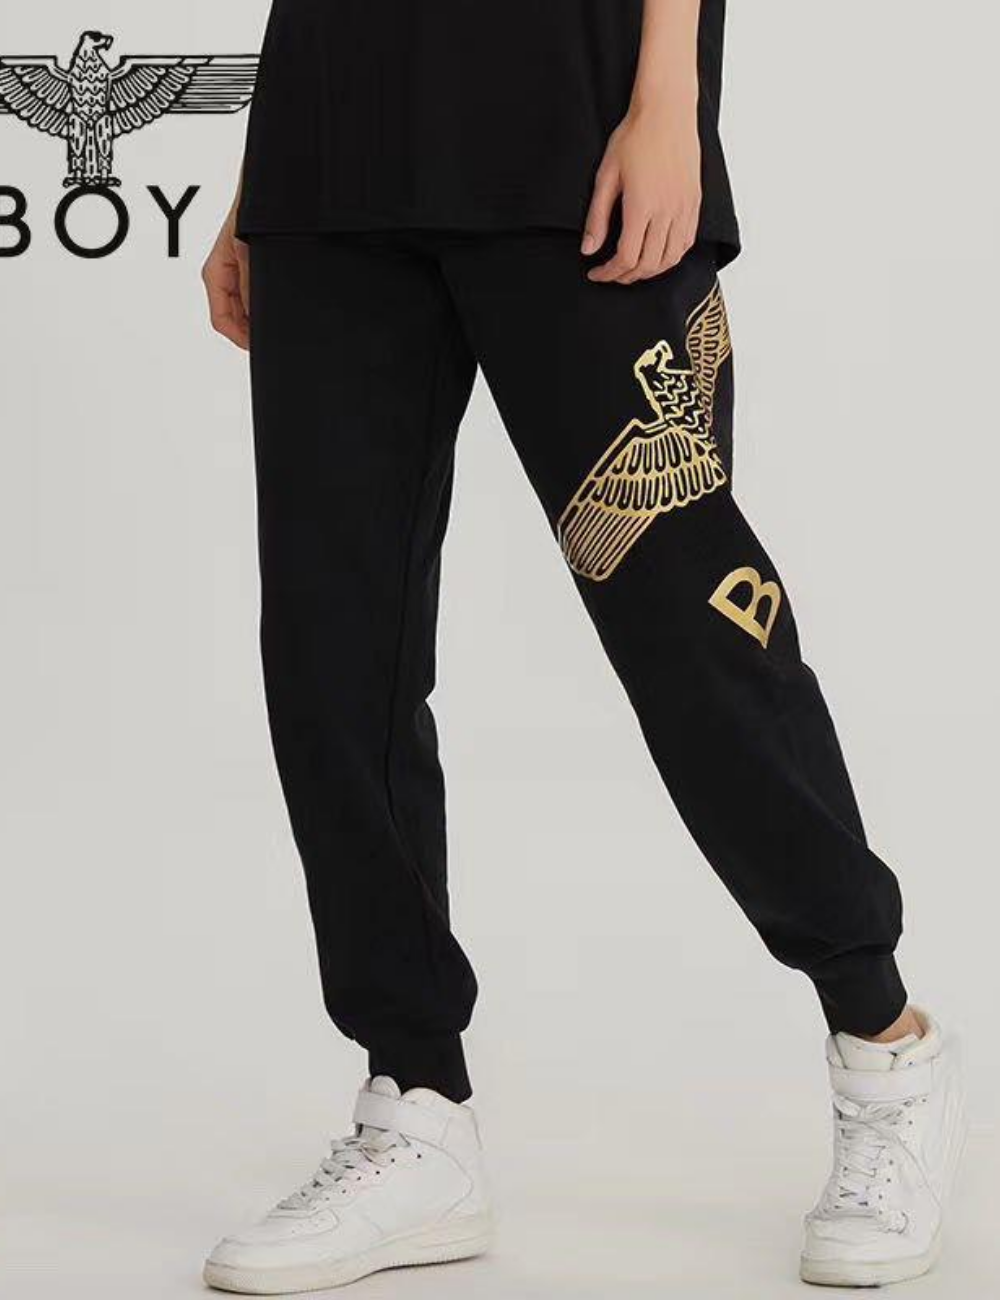 Boy London Double Striped Gold Eagle SweatPants - Shop Streetwear, Sneakers, Slippers and Gifts online | Malaysia - The Factory KL